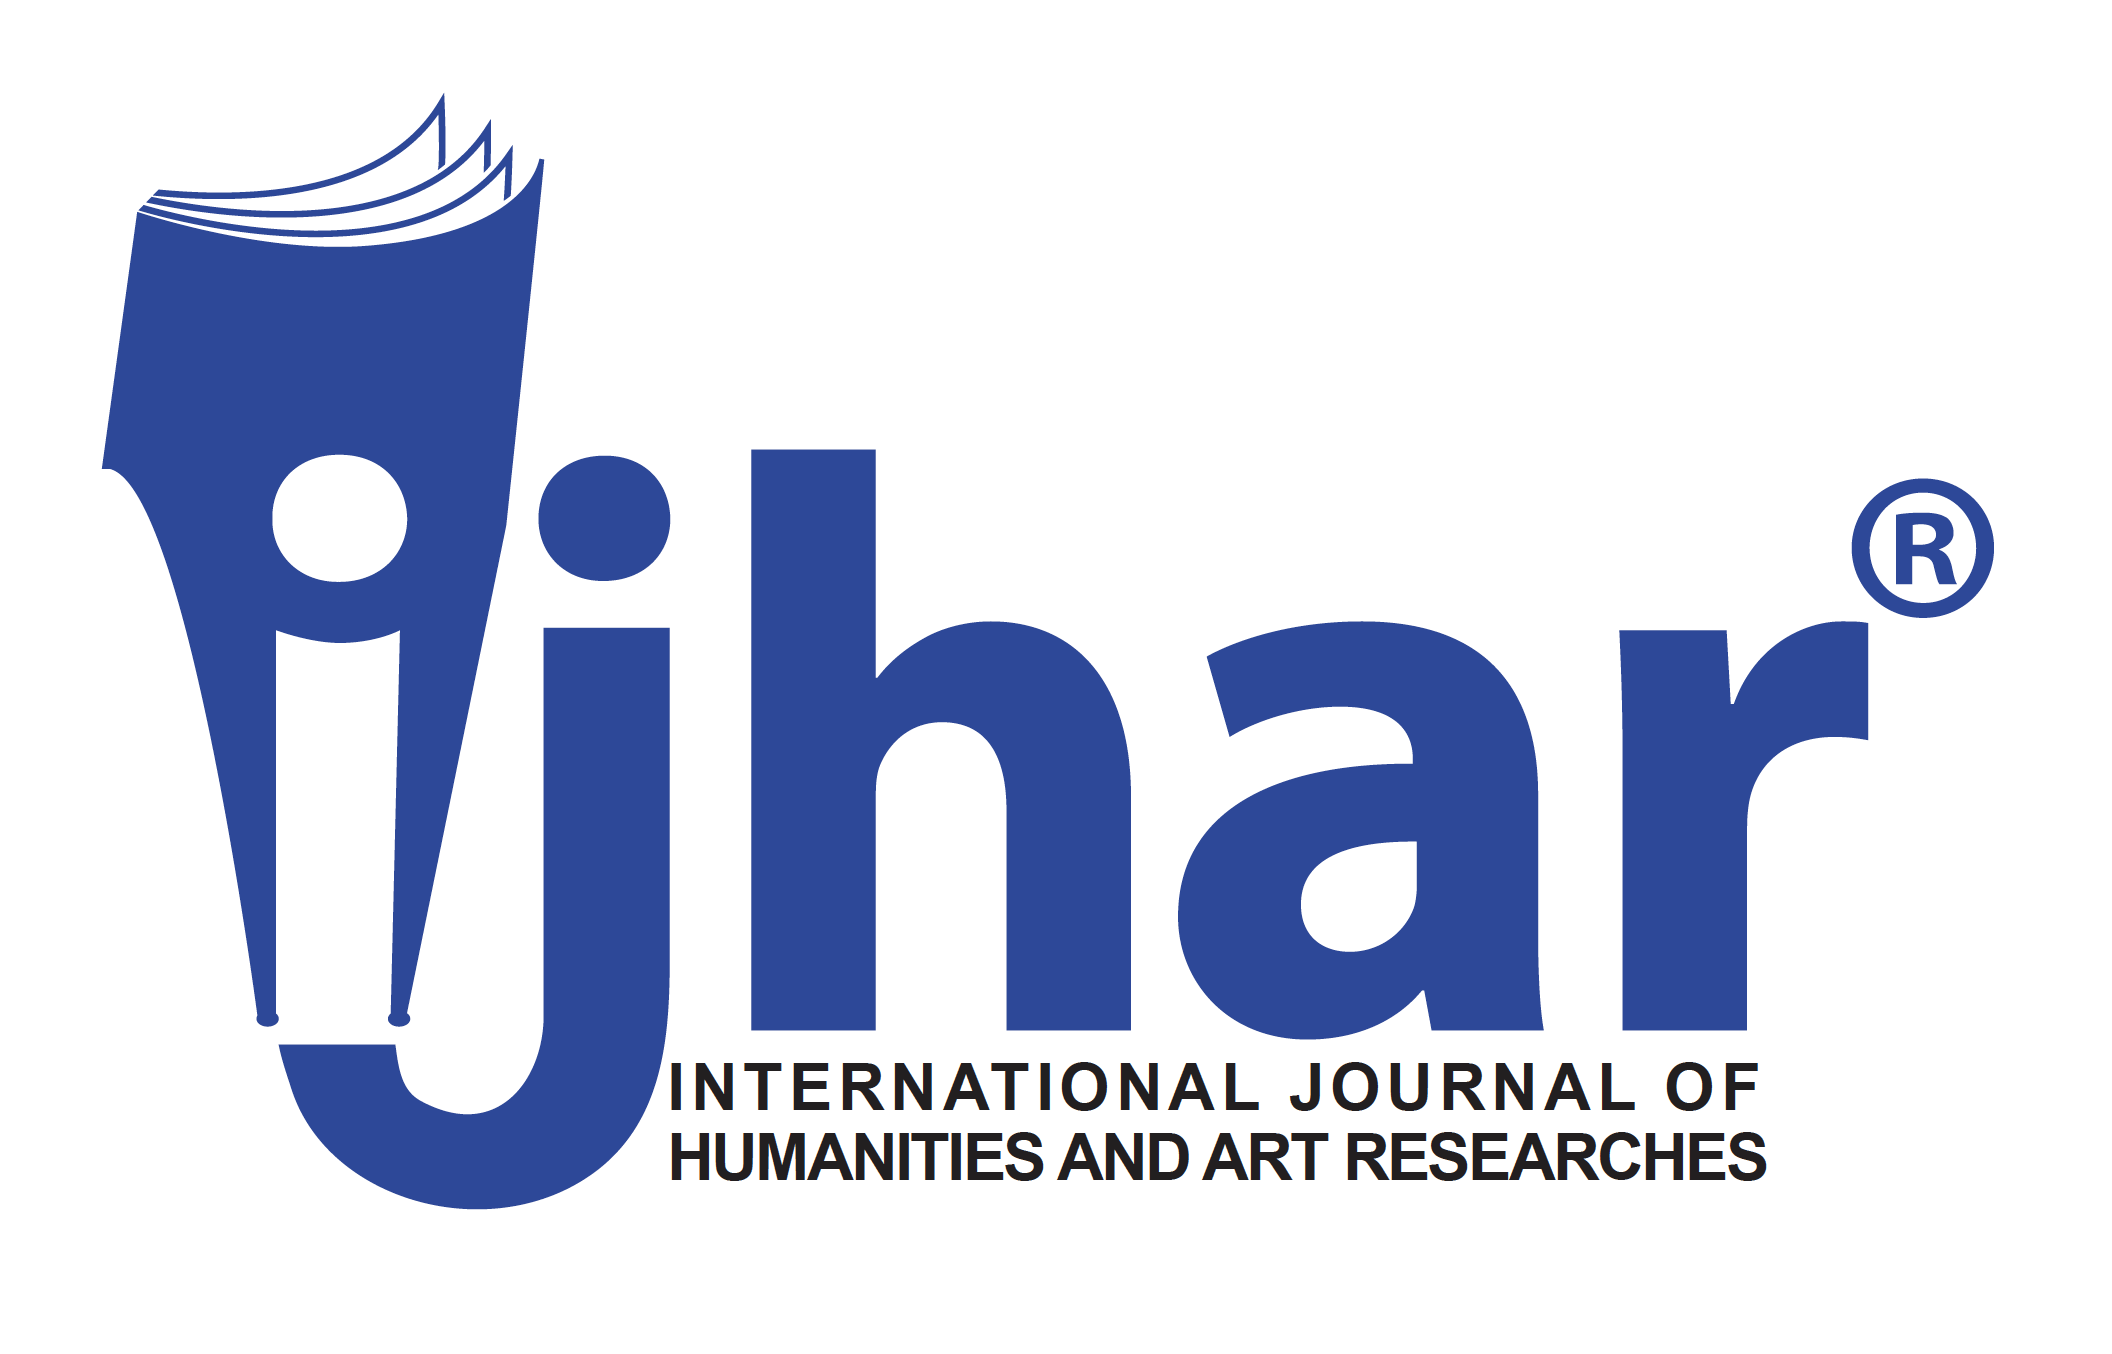 INTERNATIONAL JOURNAL OF HUMANITIES AND ART RESEARCHES